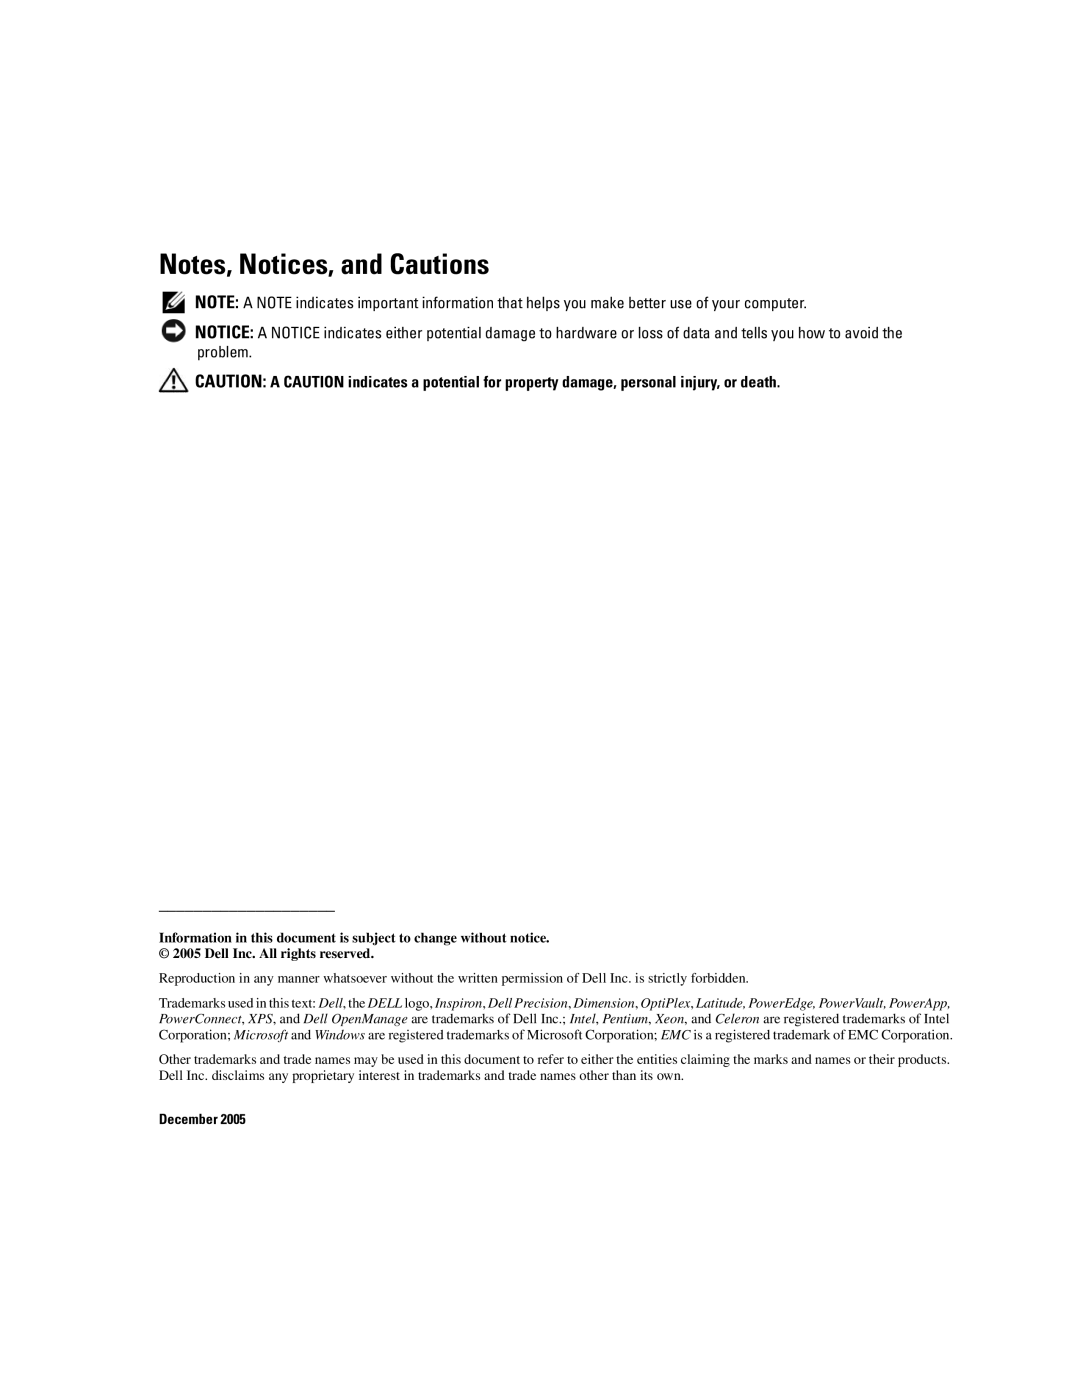 Dell 2900 owner manual Notes, Notices, and Cautions, December 